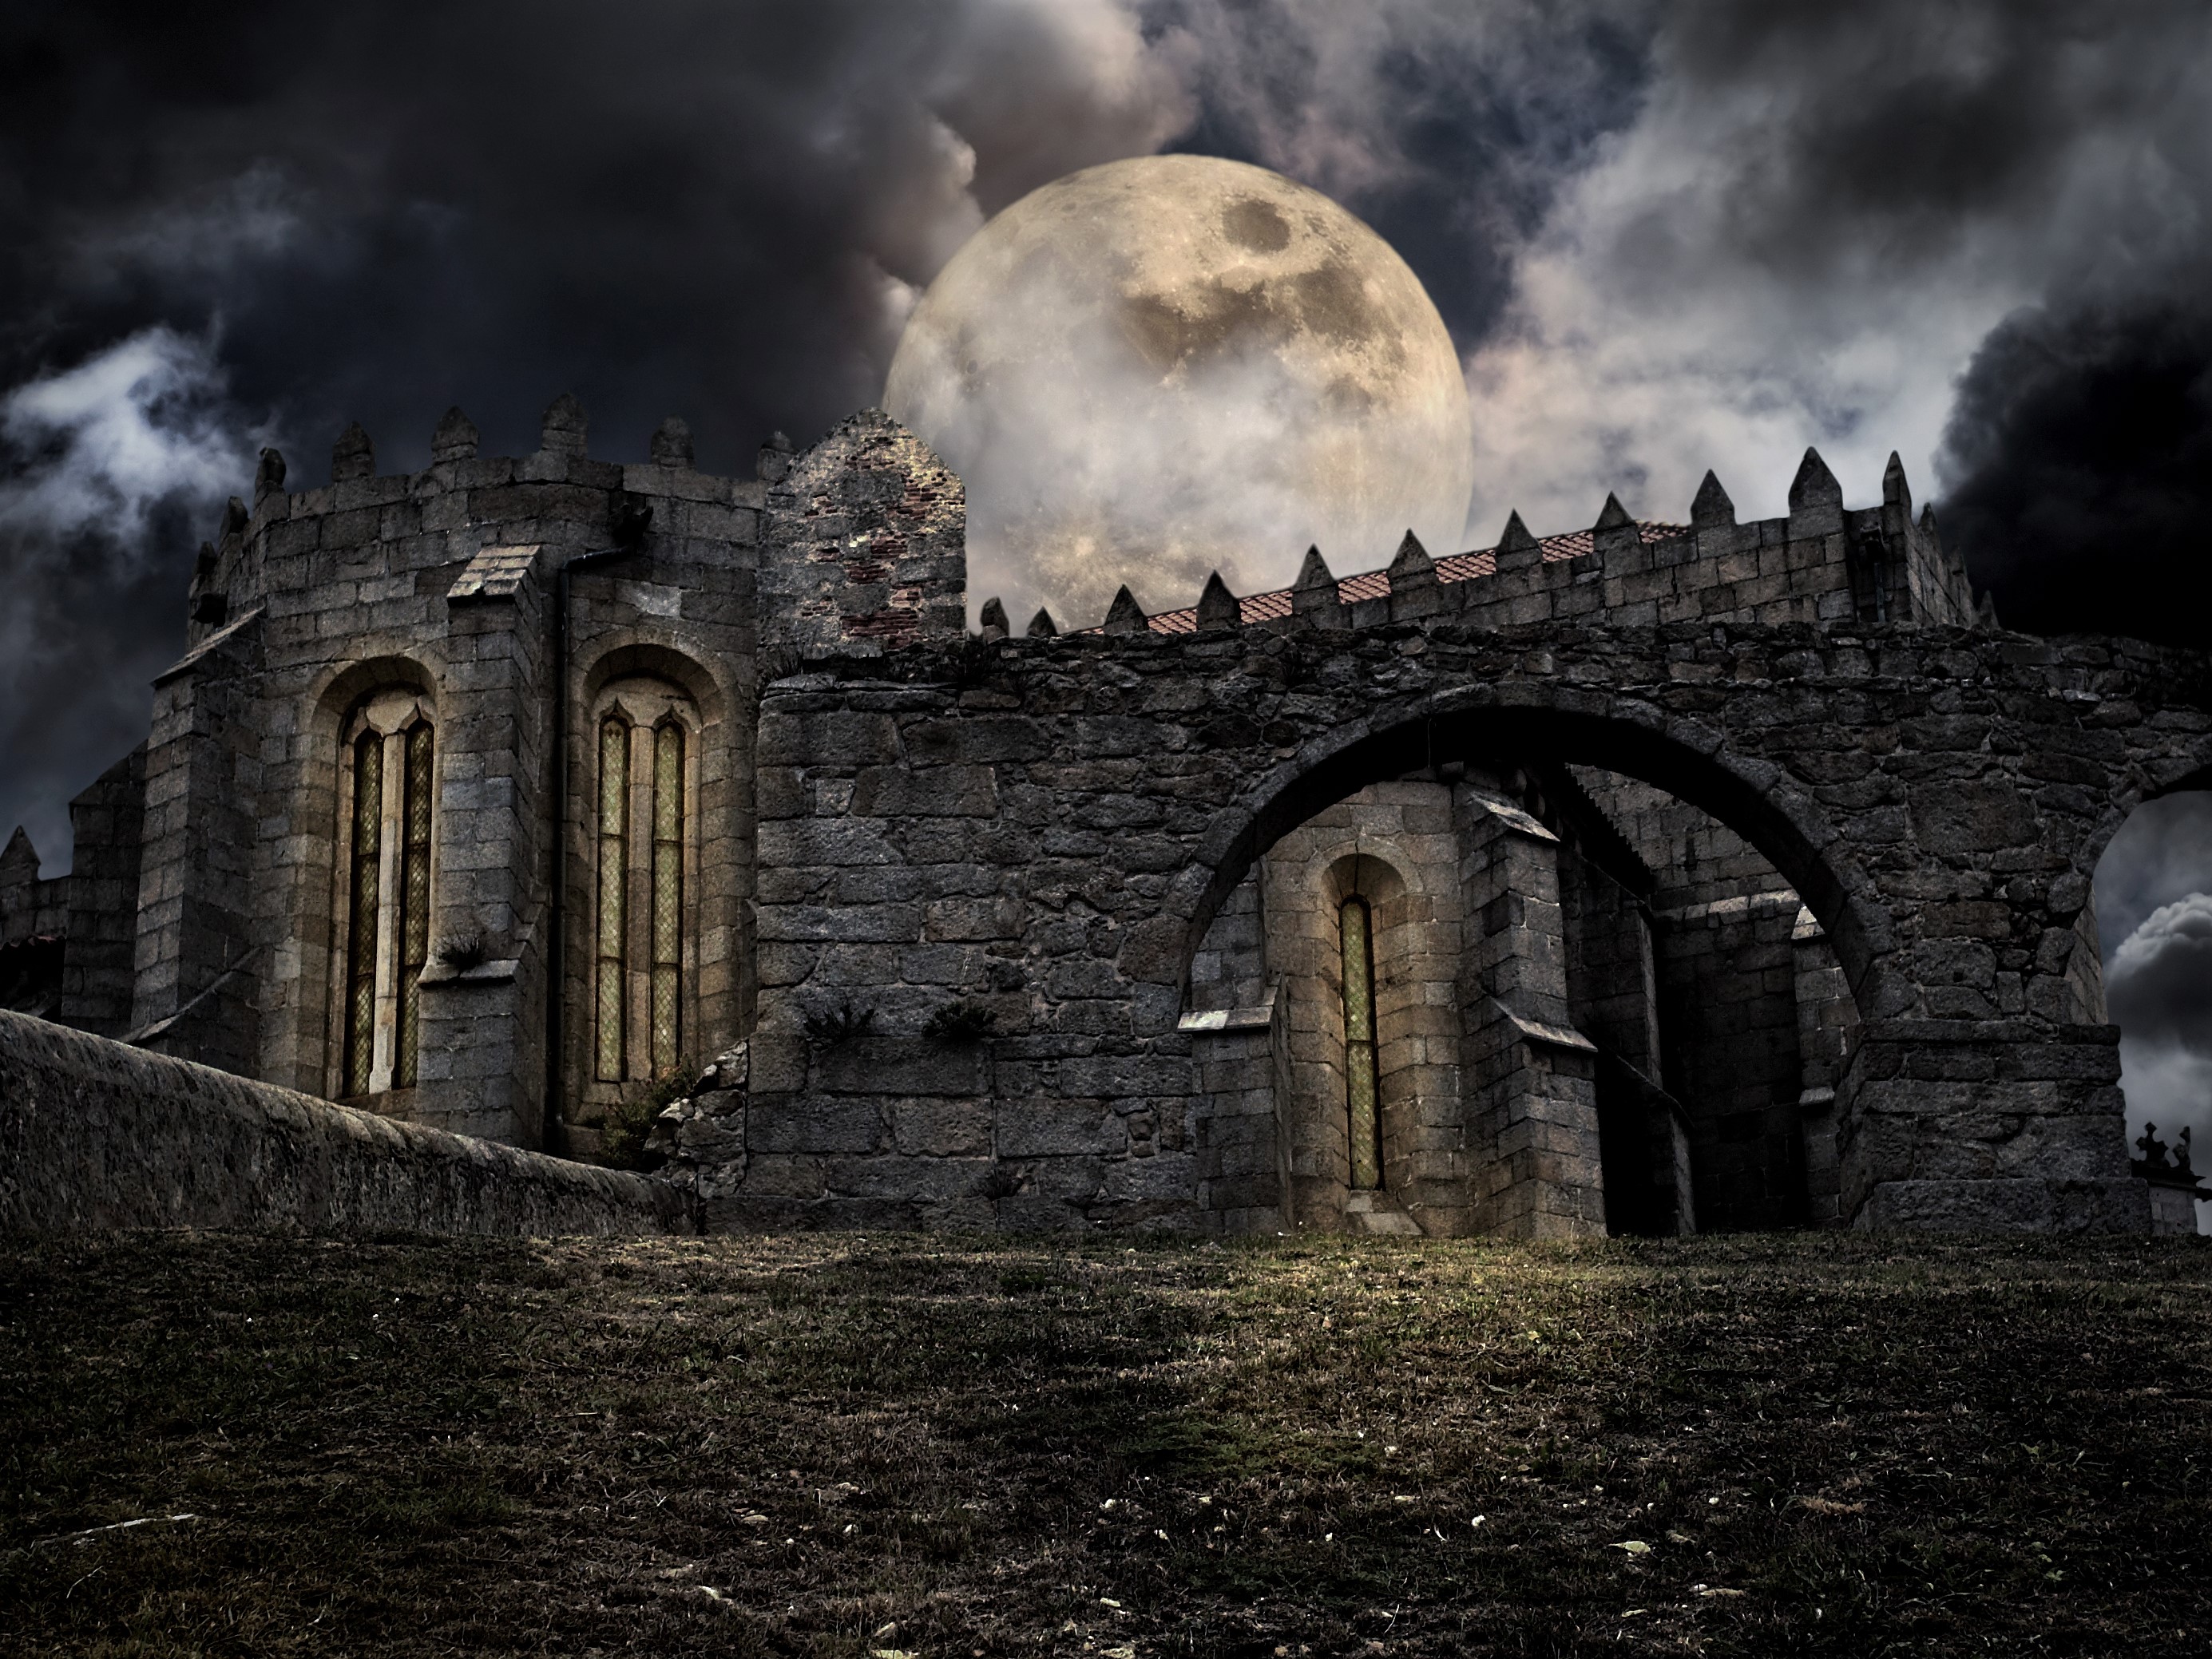 Full Moon over Old Castle HD Wallpaper | Background Image | 2770x2078